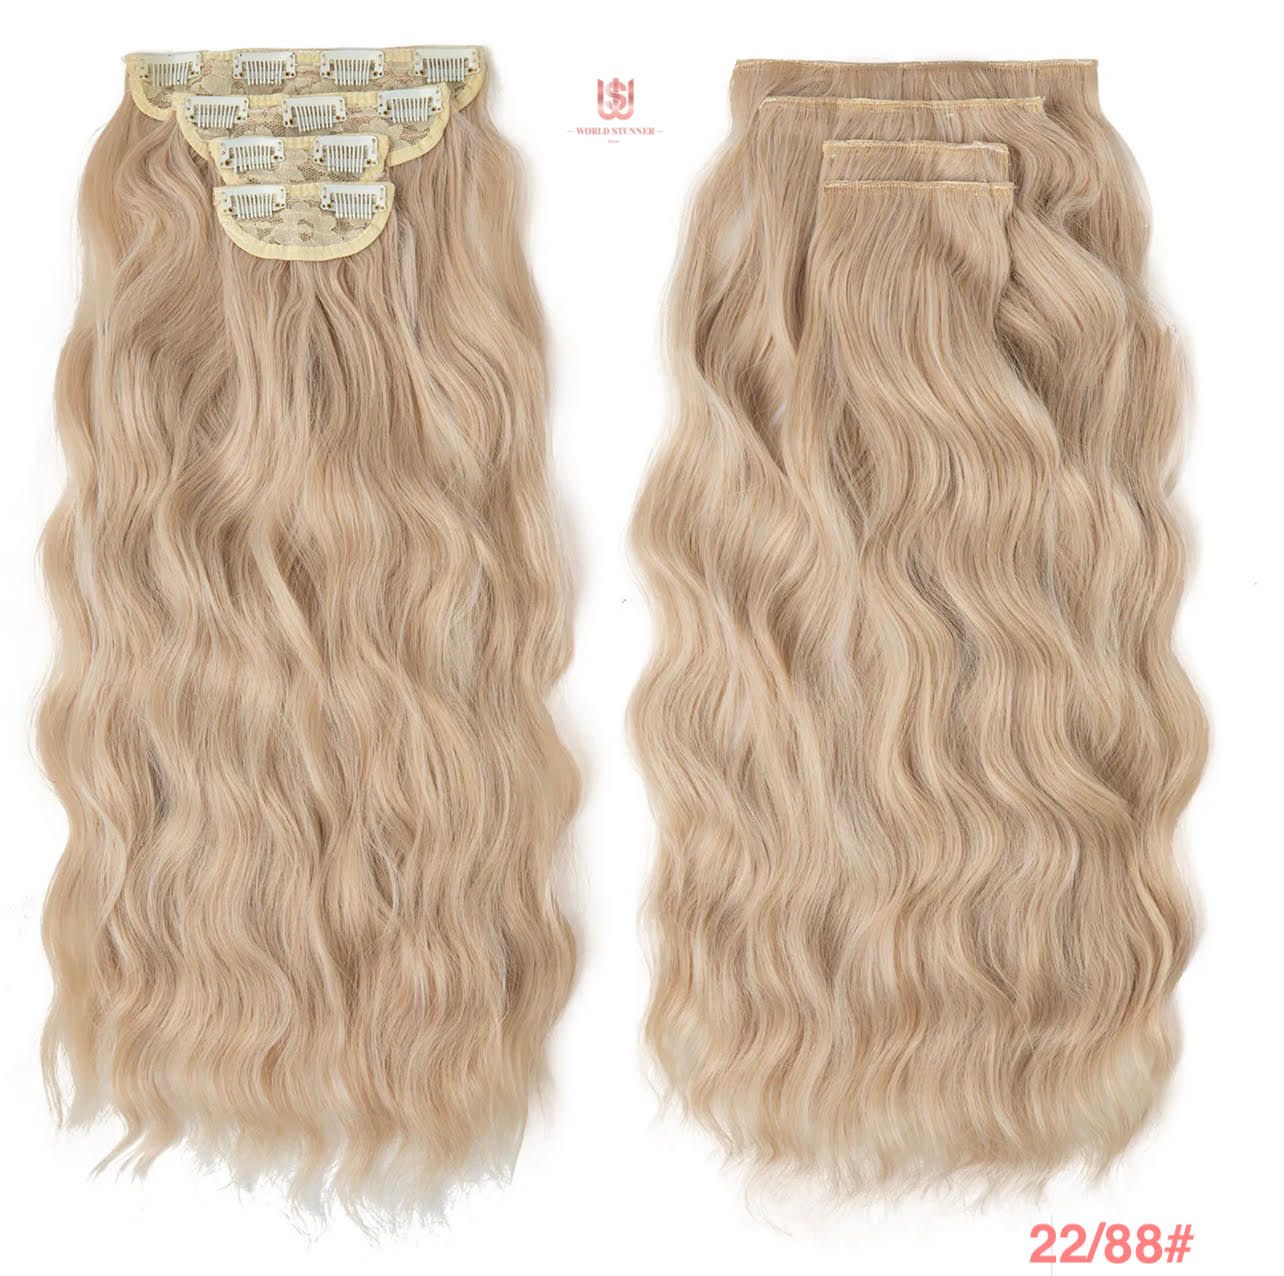 22 BLONDE - SUPER THICK 22” 4 PIECE WAIST Length WAVE CLIPS IN HAIR Extensions